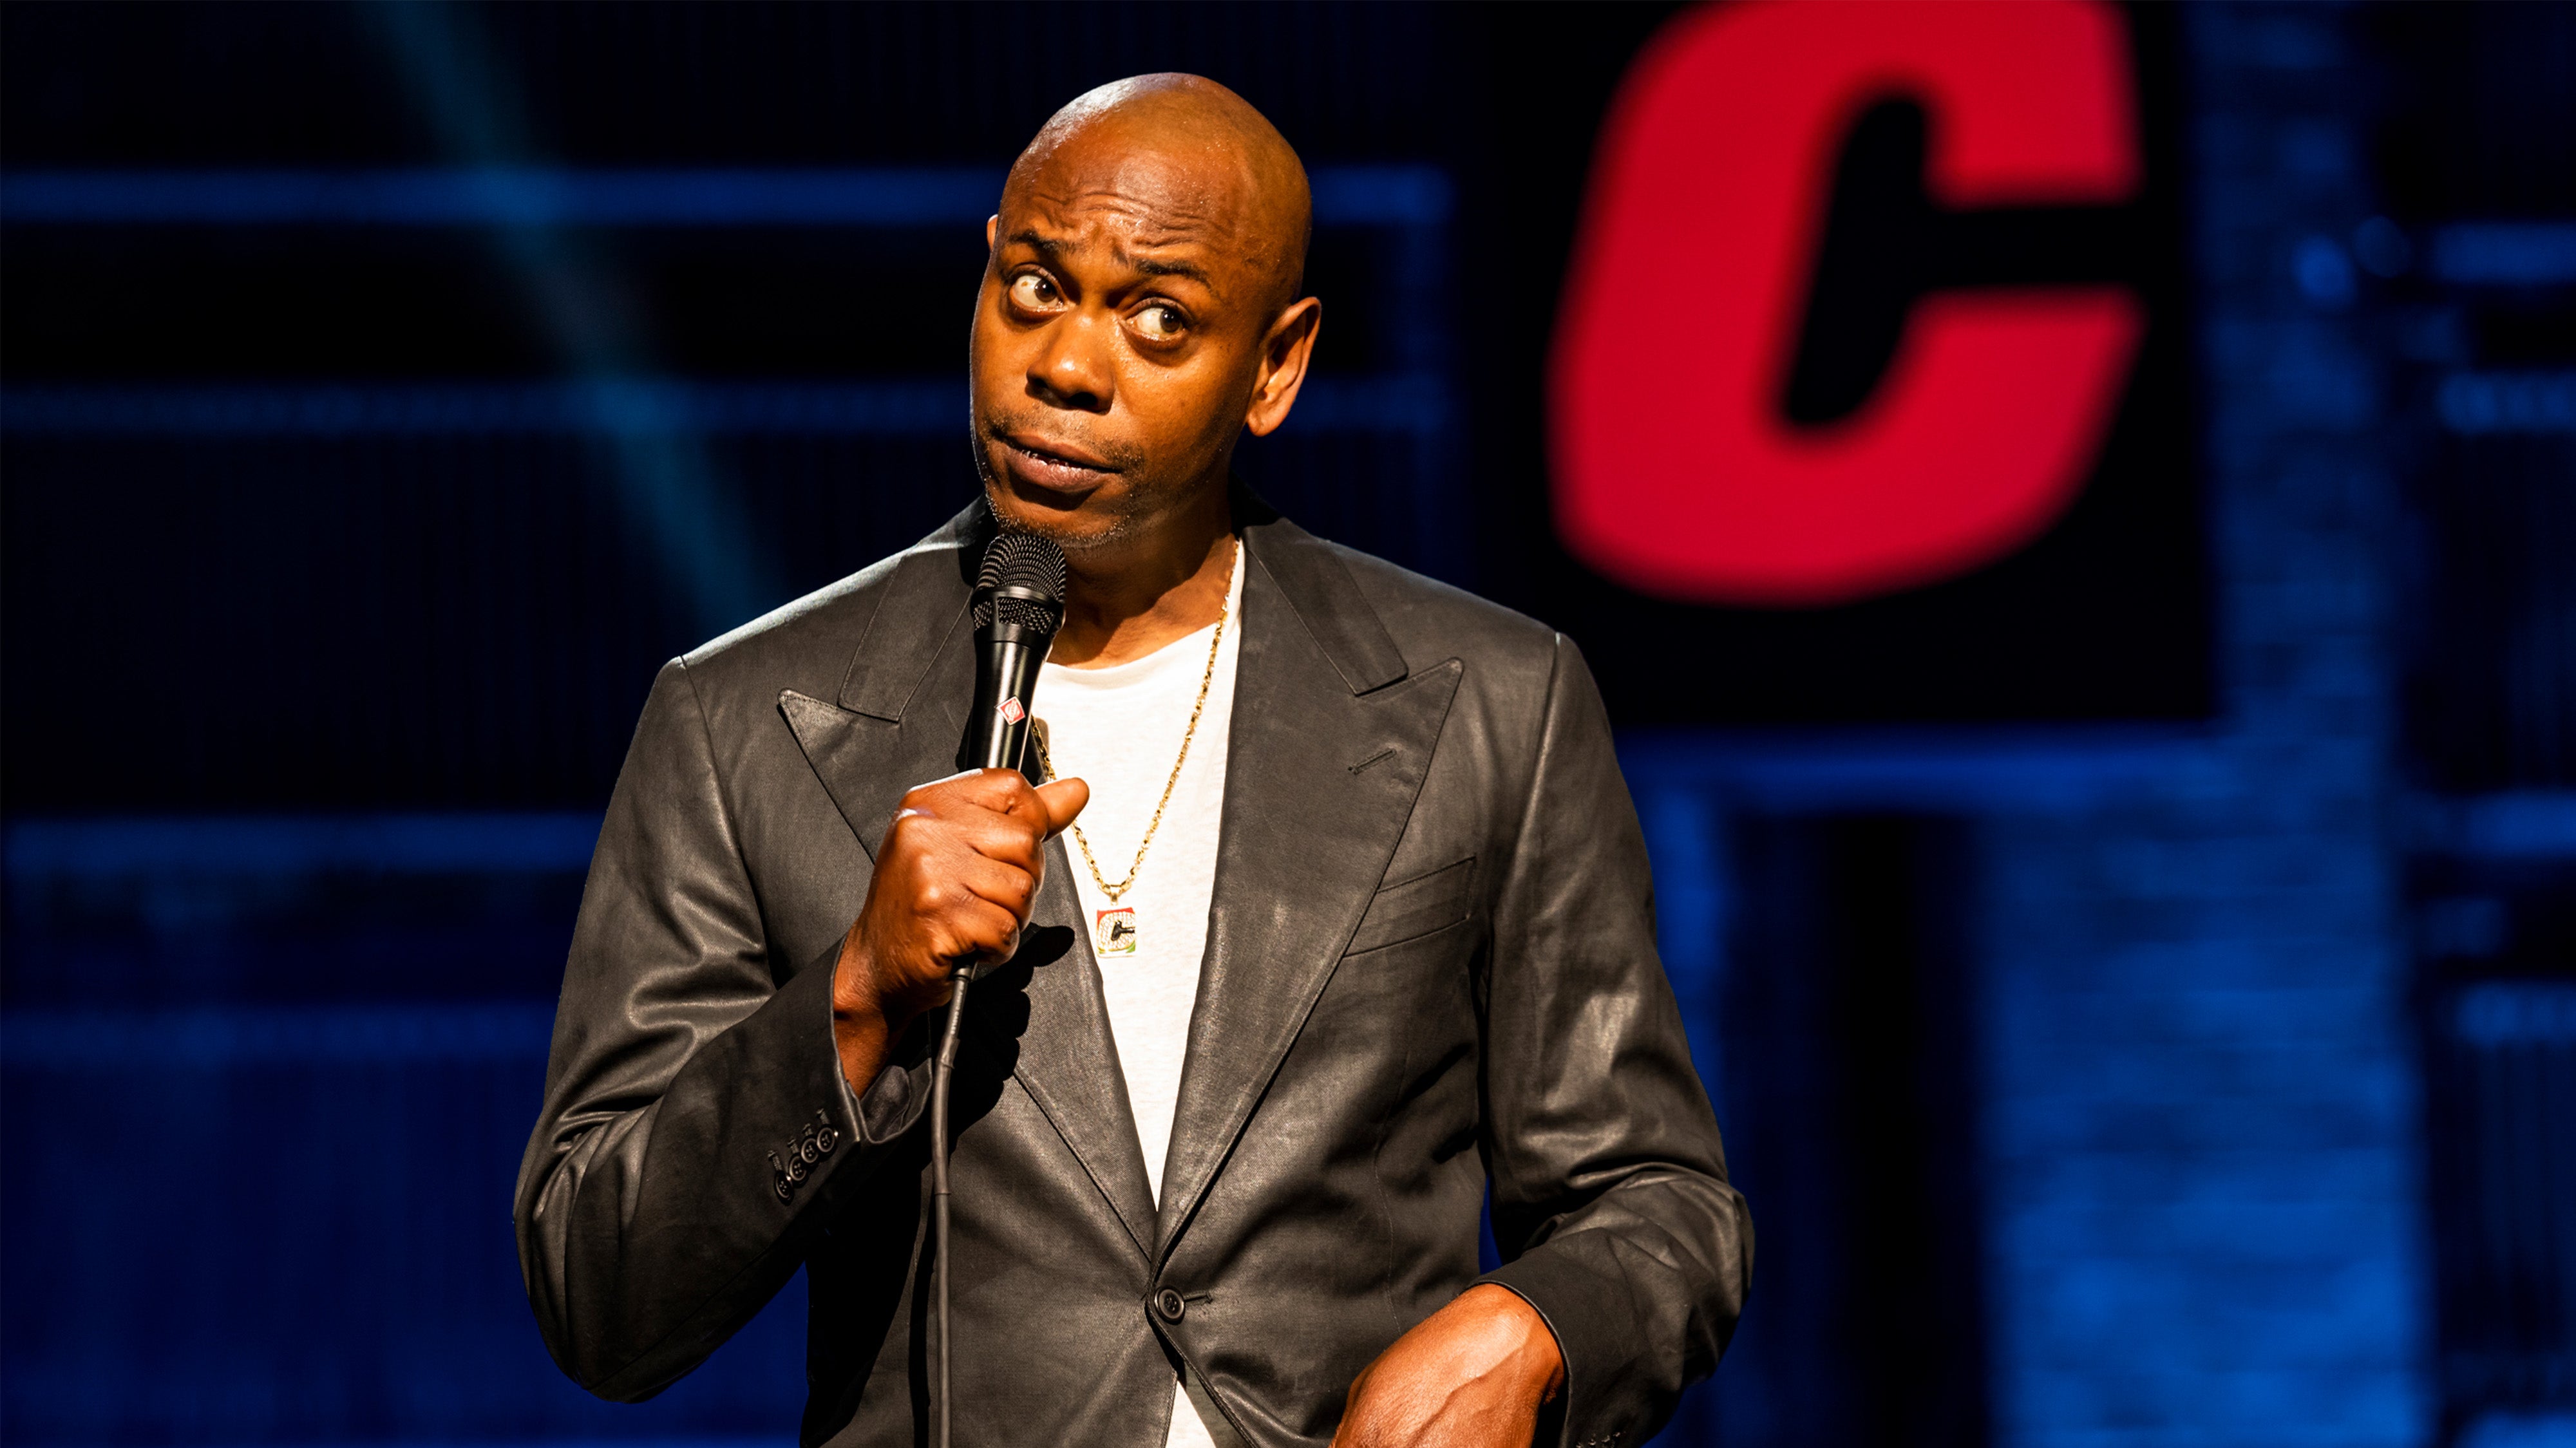 Dave Chappelle: The Closer. Courtesy of Netflix.